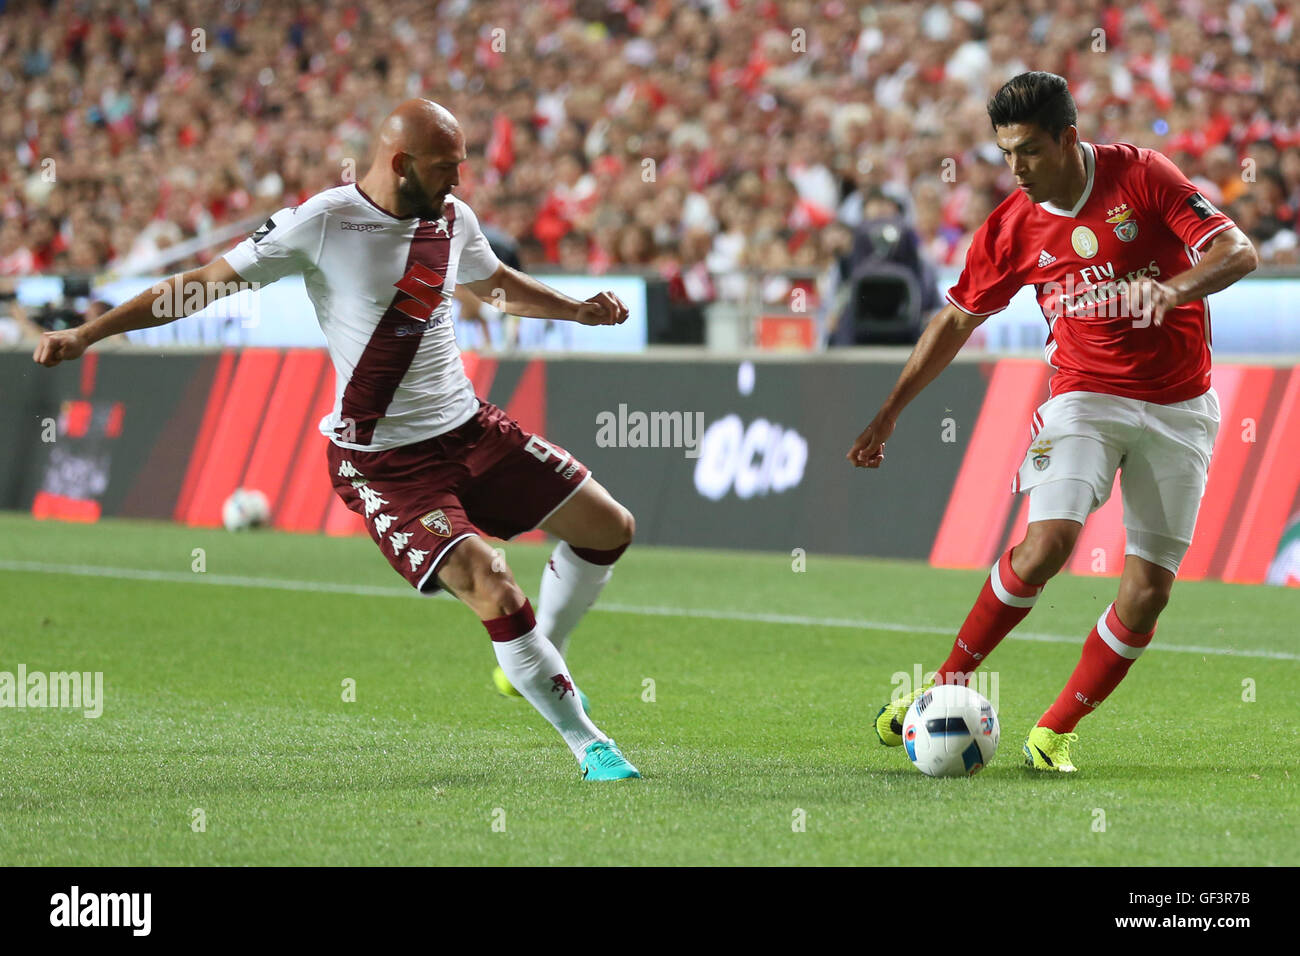 Lisbon, Portugal. 27th July, 2016. SL Benfica's forward from Mexico Raul Jimenez tried to avoid the tackle of Torino's defender Arlind Ajeti Credit:  Alexandre Sousa/Alamy Live News Stock Photo